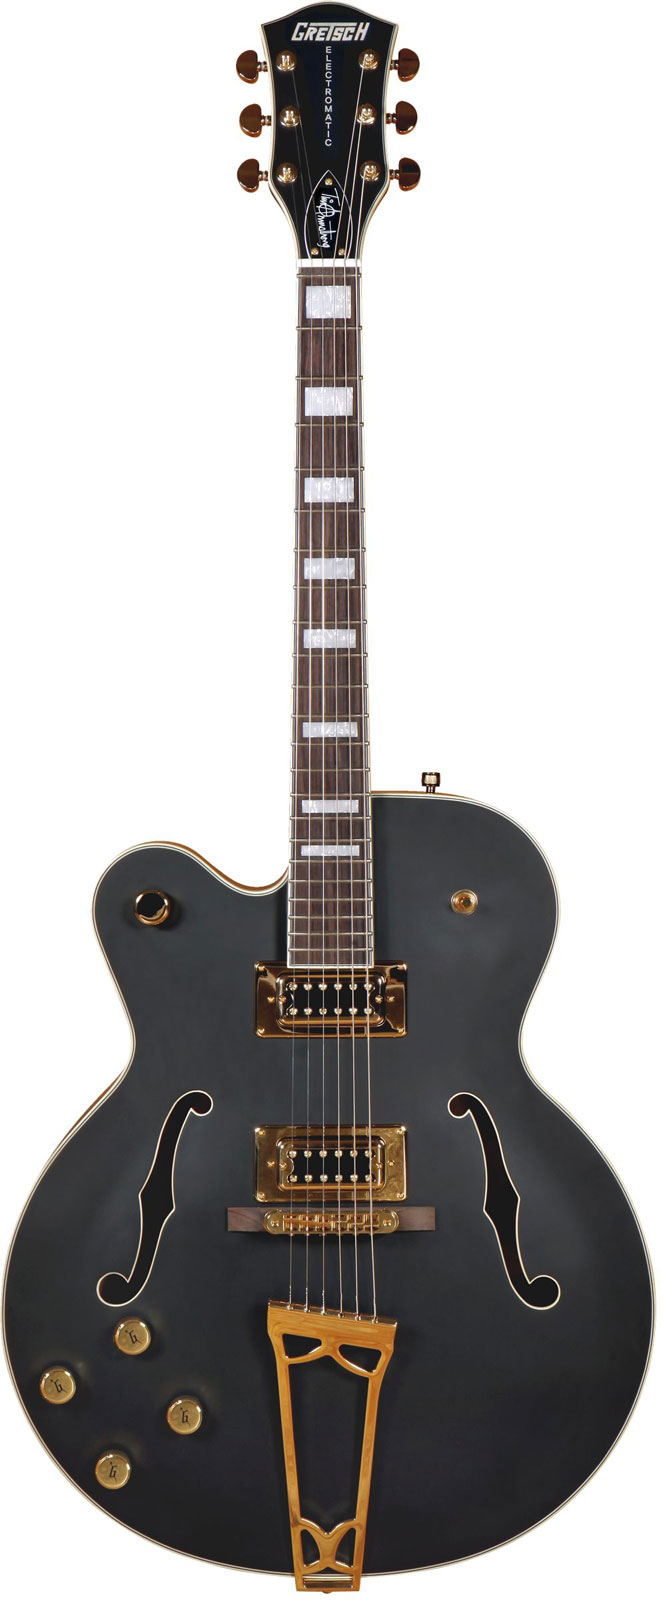 GRETSCH GUITARS G5191BK TIM ARMSTRONG SIGNATURE ELECTROMATIC HOLLOW BODY, LHED, GOLD HARDWARE, FLAT BLACK